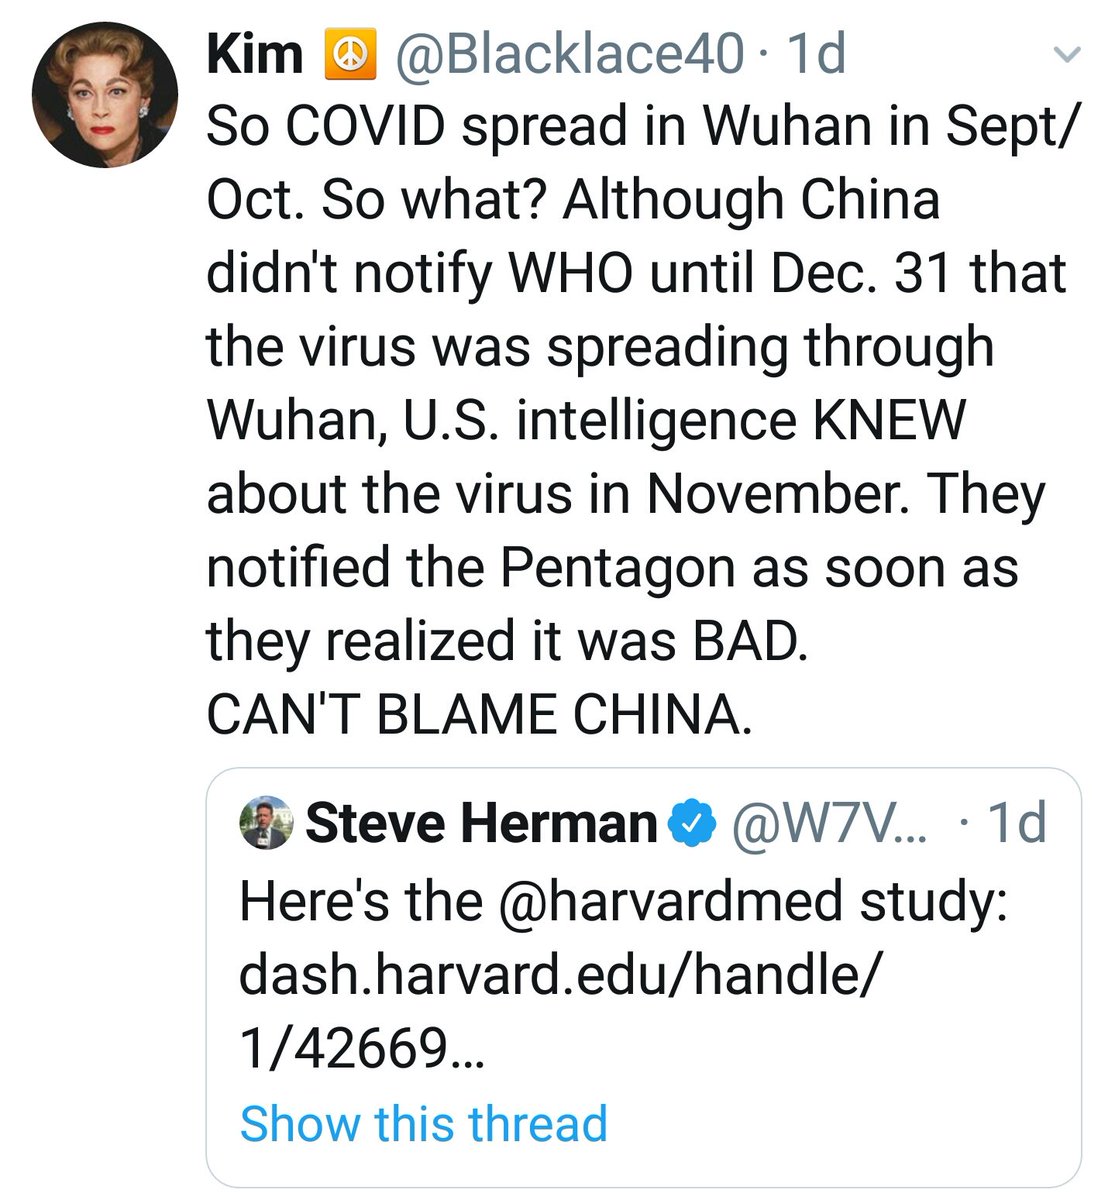 Adding to my threadToday is June 9Seems the  #CoronaVirus started months sooner in China...AND our  #IC knew about it in November of 2019This makes sense, given how China tends to keep a lid on viral outbreaks..until it just becomes simply overwhelming #Wuhan #COVID19 #Trump